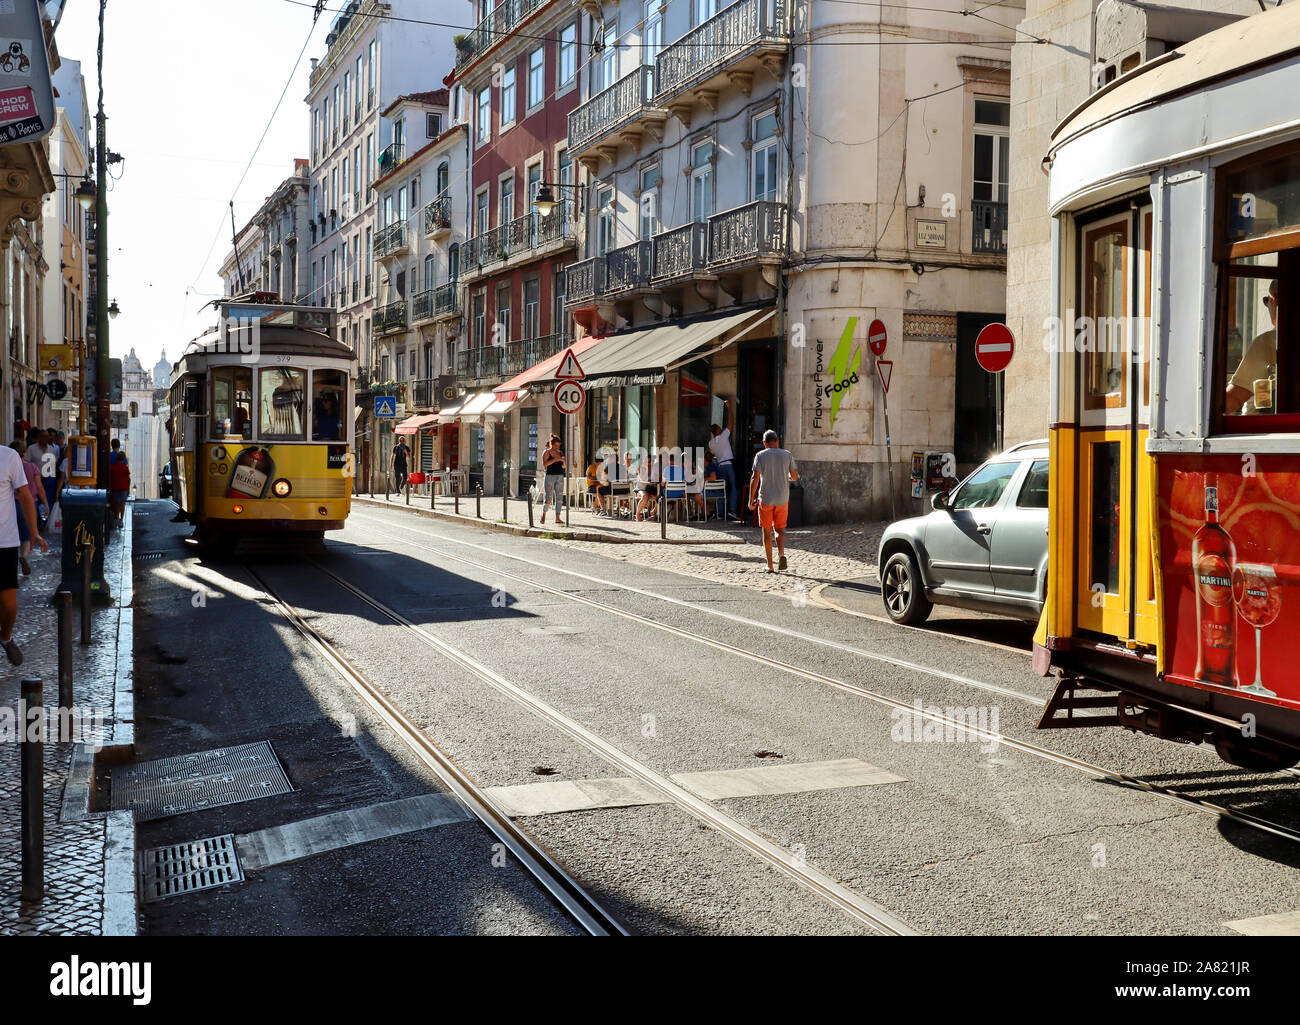 LISBON BAIRRO ALTO, PORTUGAL - AUG 04: Busy lifestyle in the old town of Lisbon with traditional tram , shops and urban life in Bairro Alto district, Stock Photo